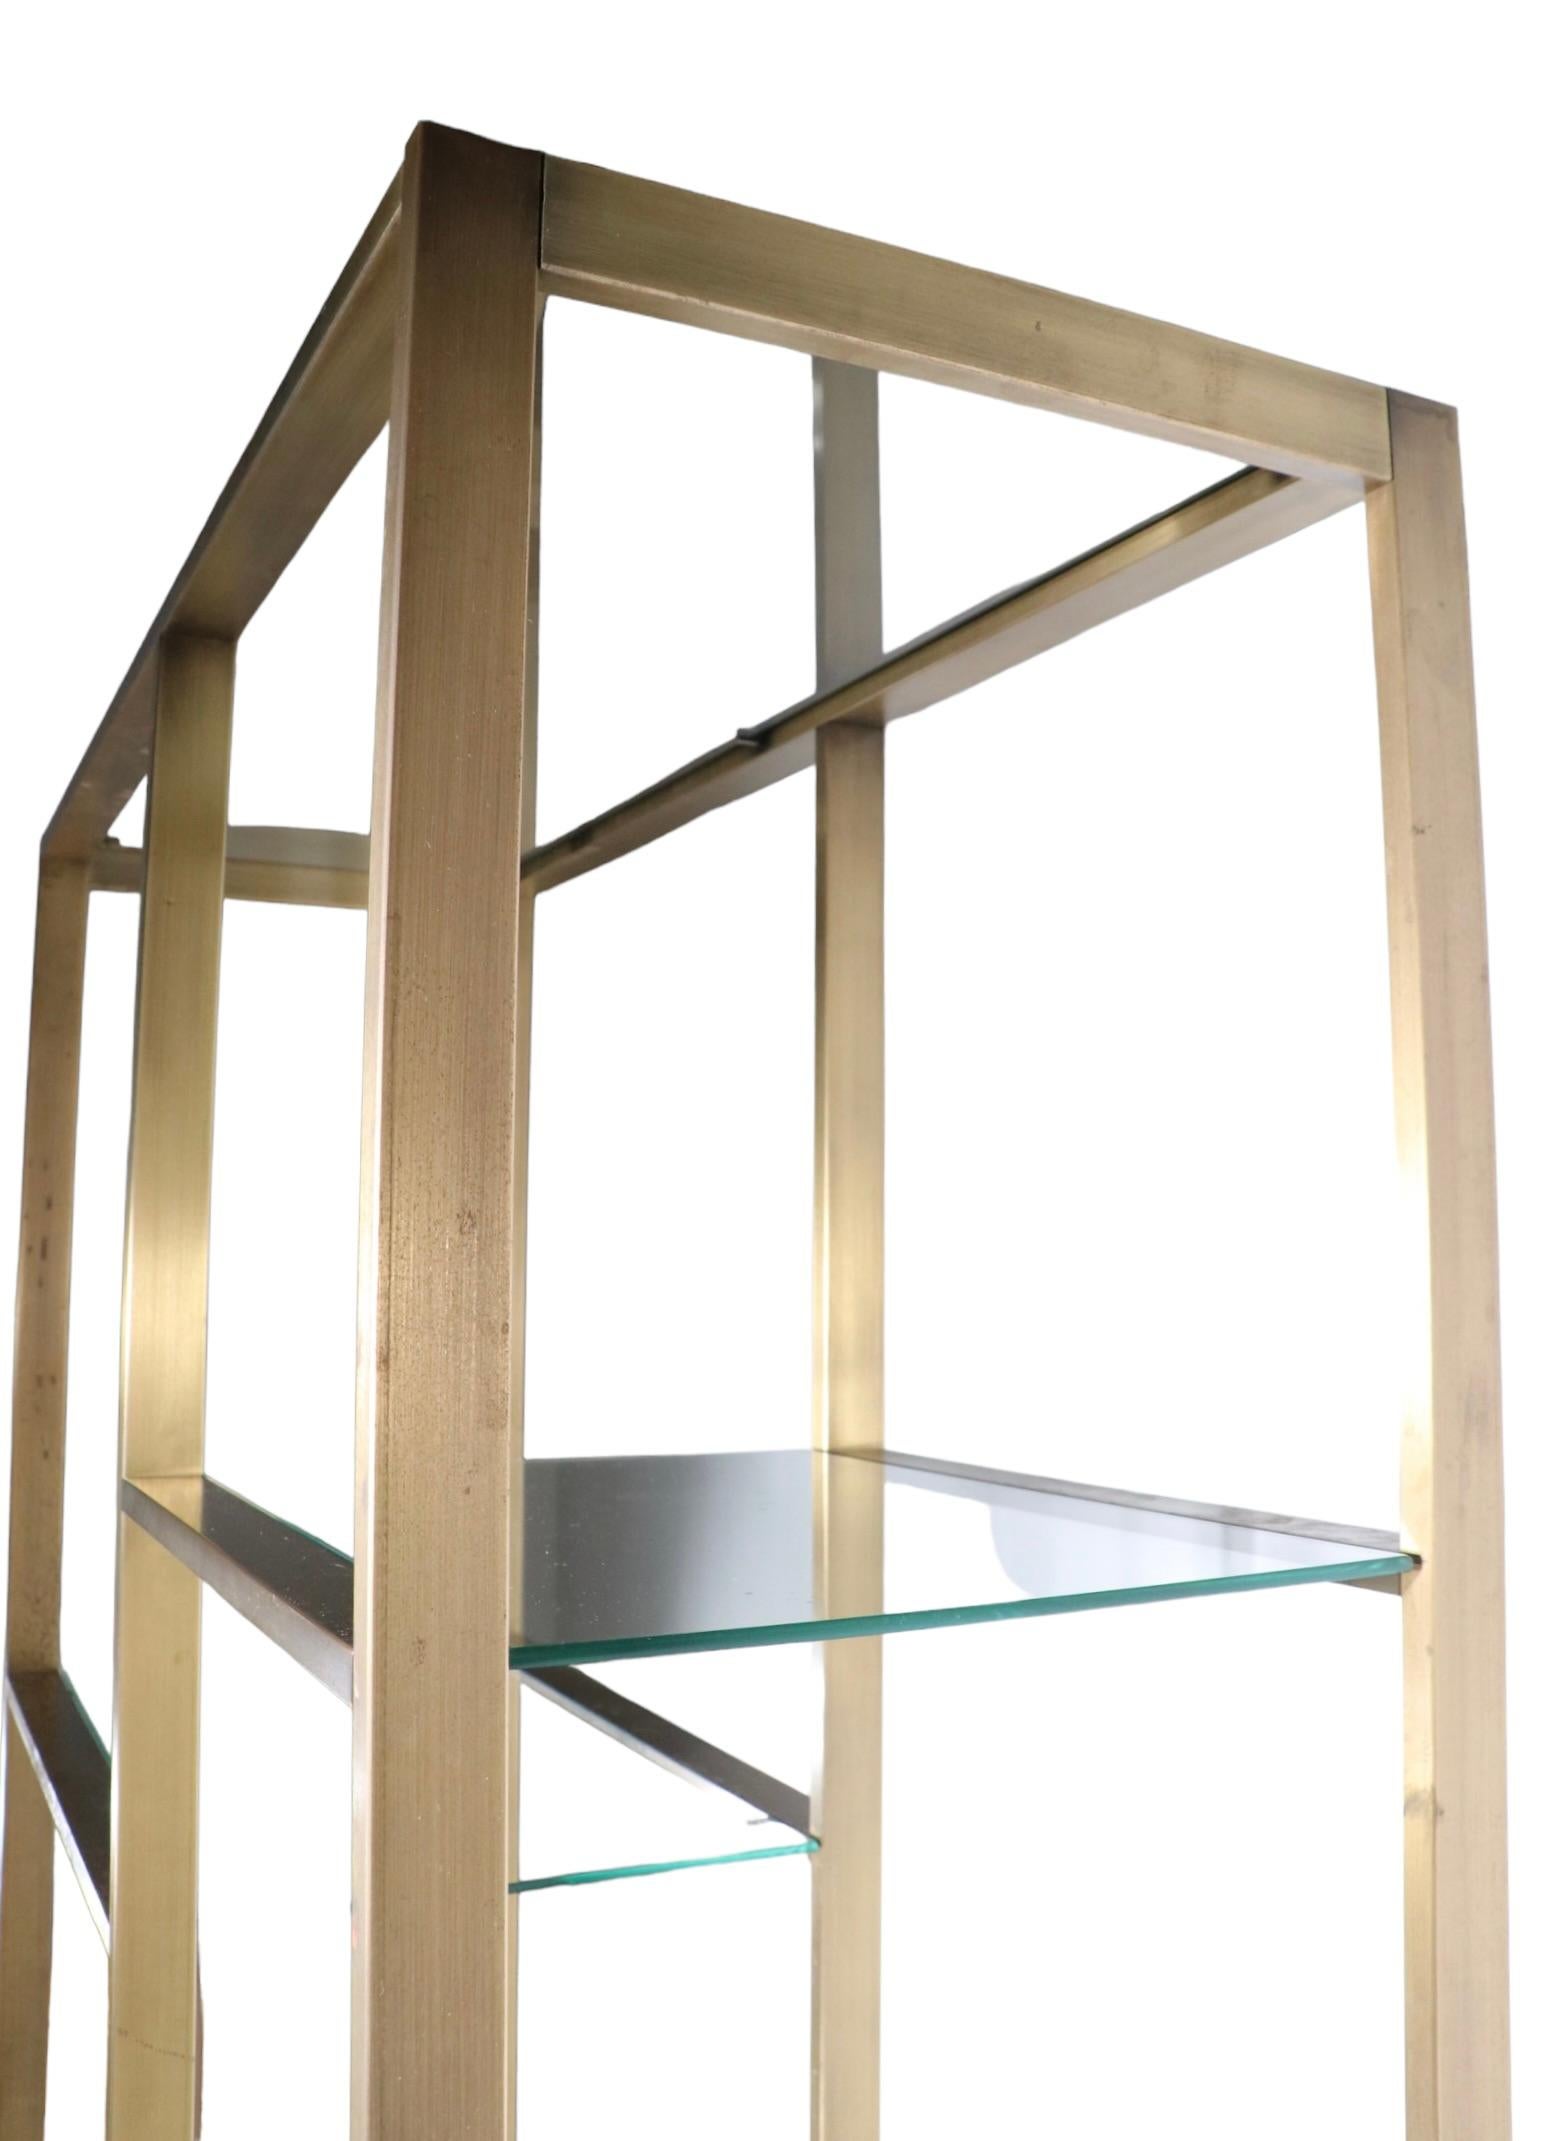 Bronze and Glass Etagere Shelf by Milo Baughman c. 1970's  For Sale 2